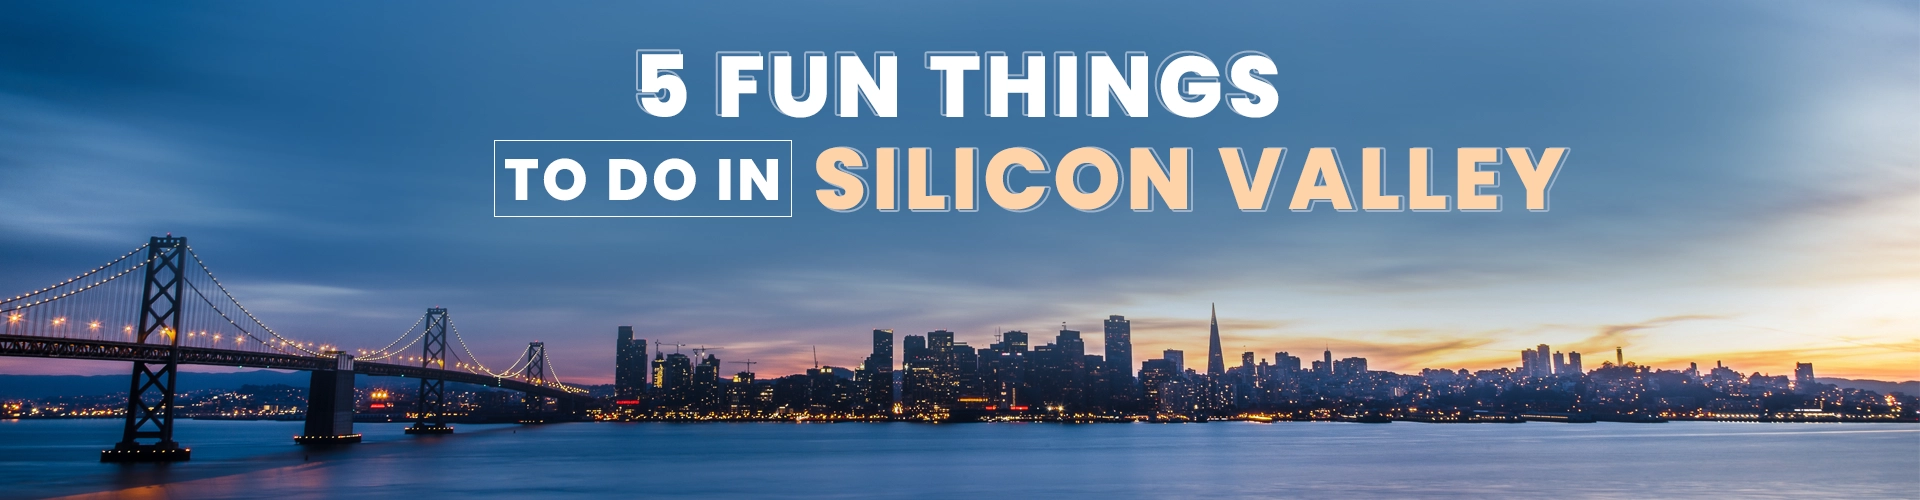 Fun Things to Do in Silicon Valley